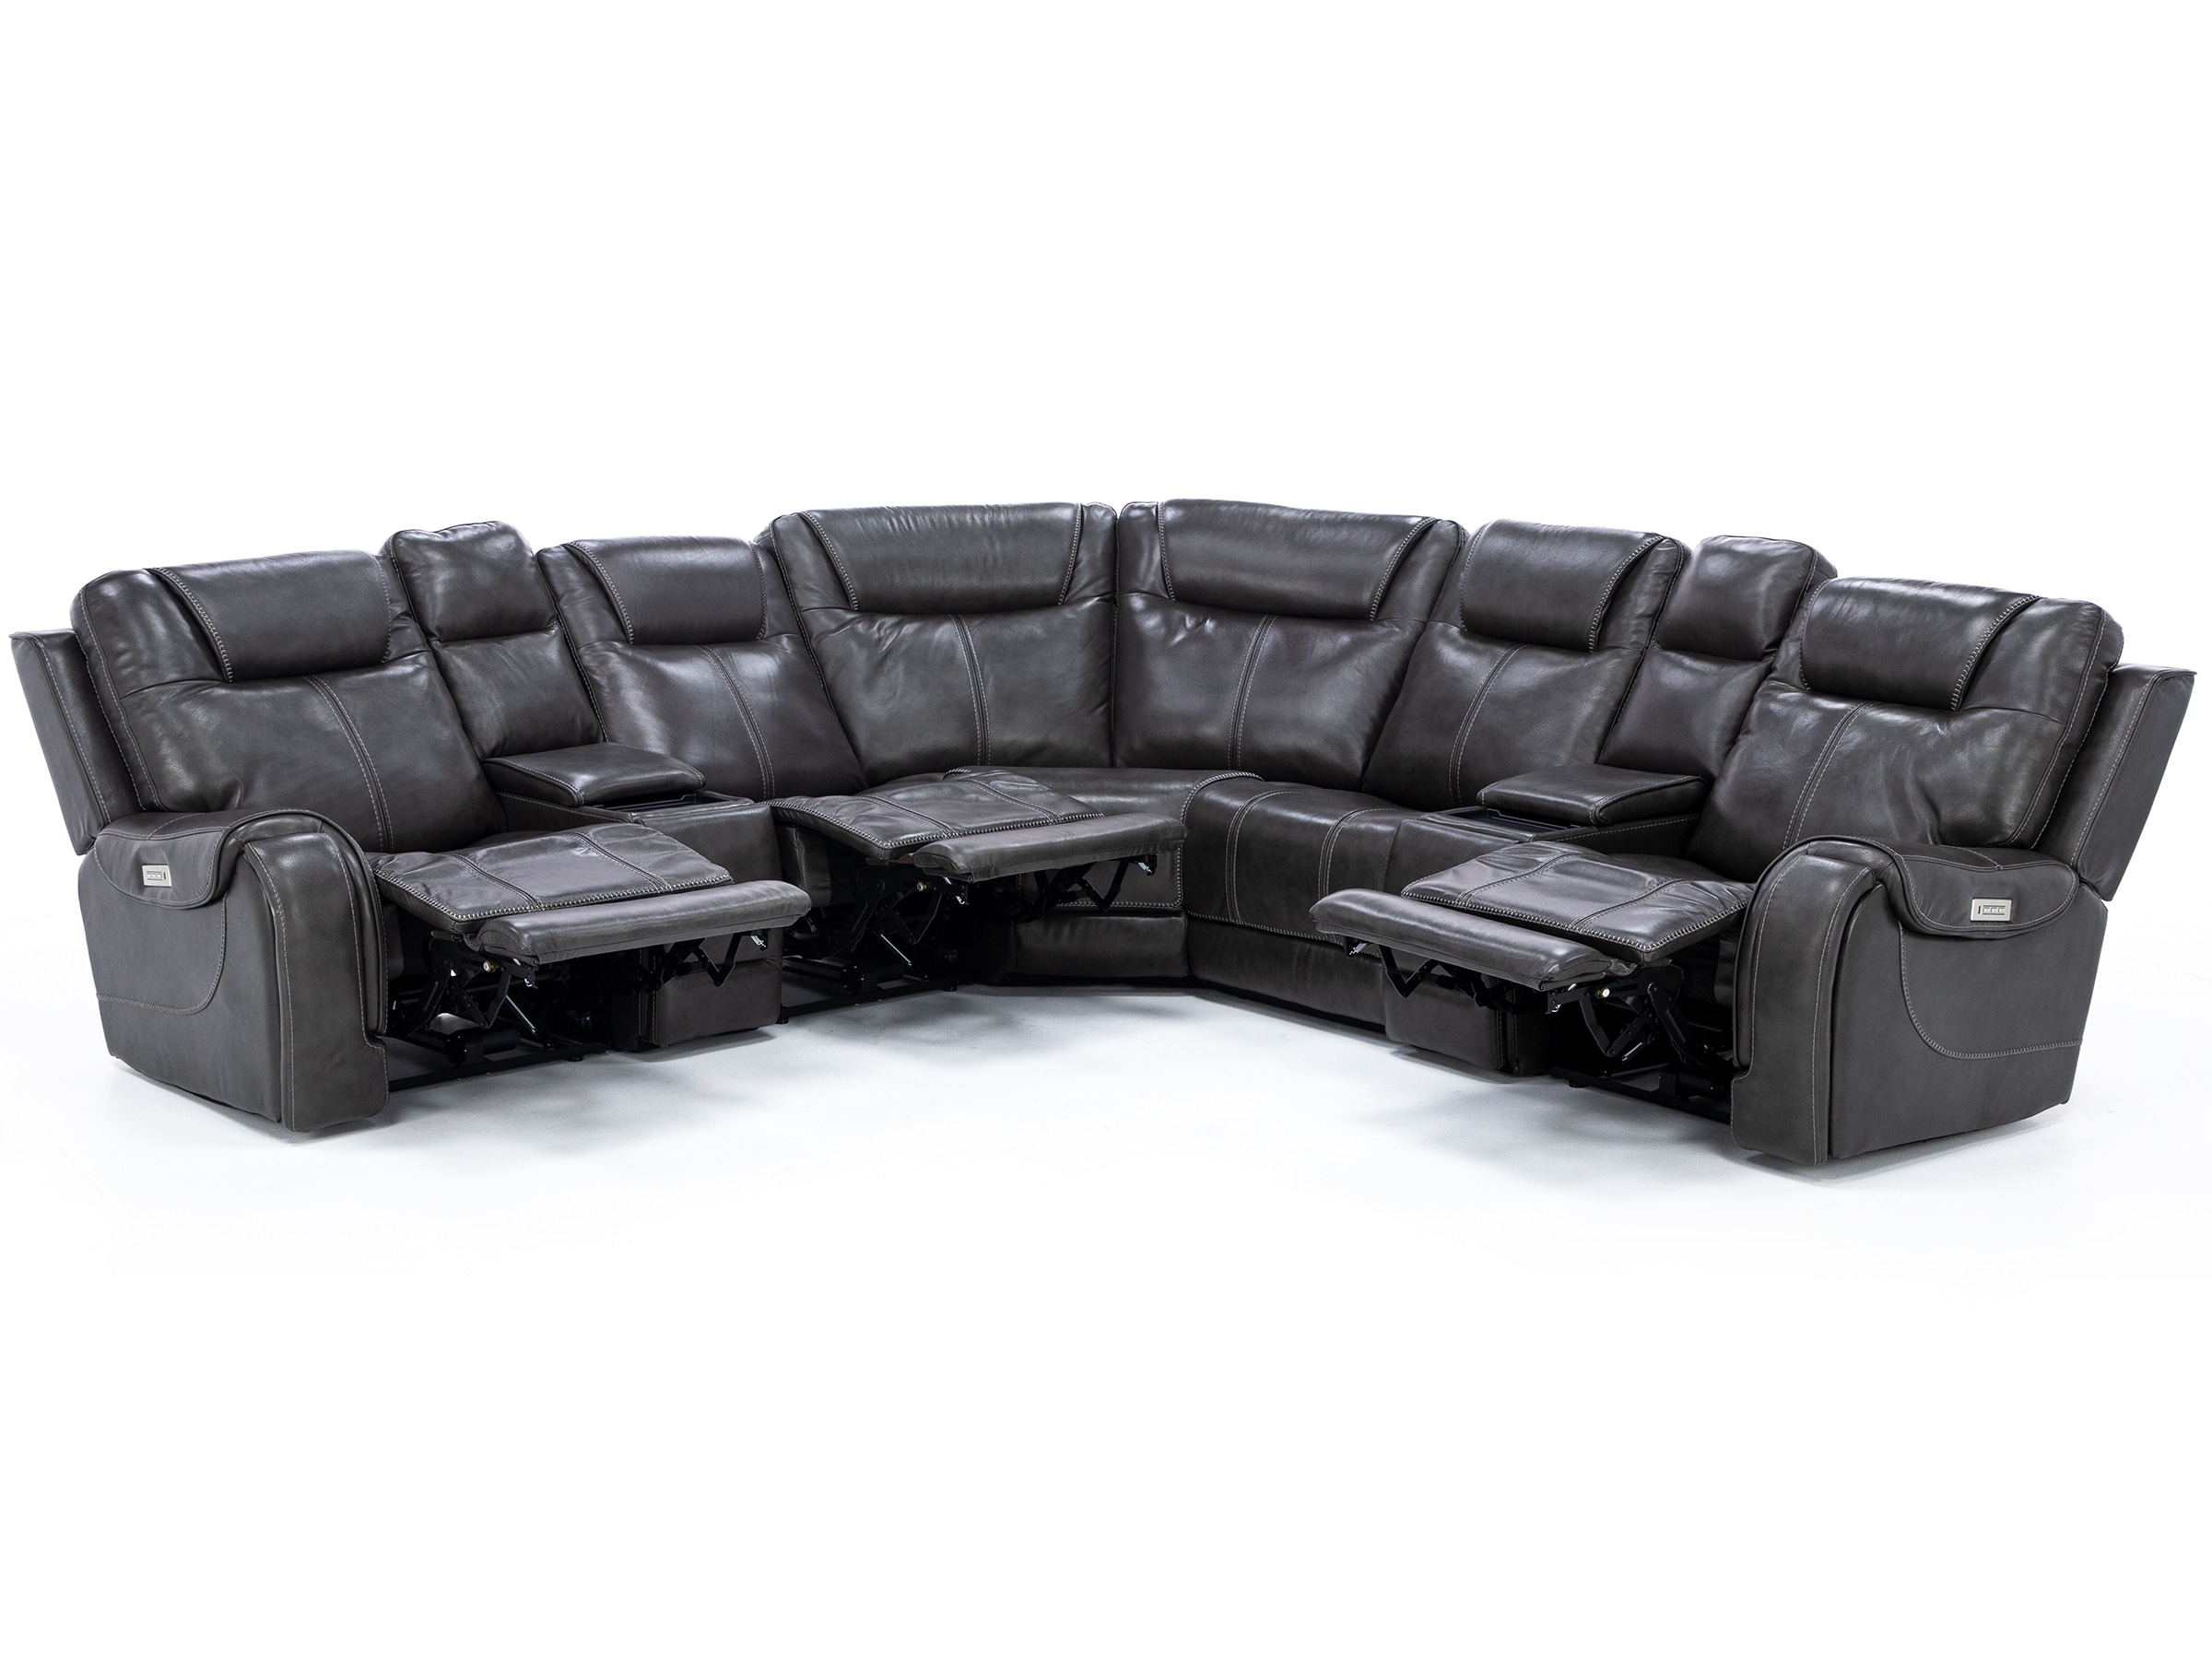 Zion | Reclining Steinhafels Loaded Leather Fully Modular 7-Pc.